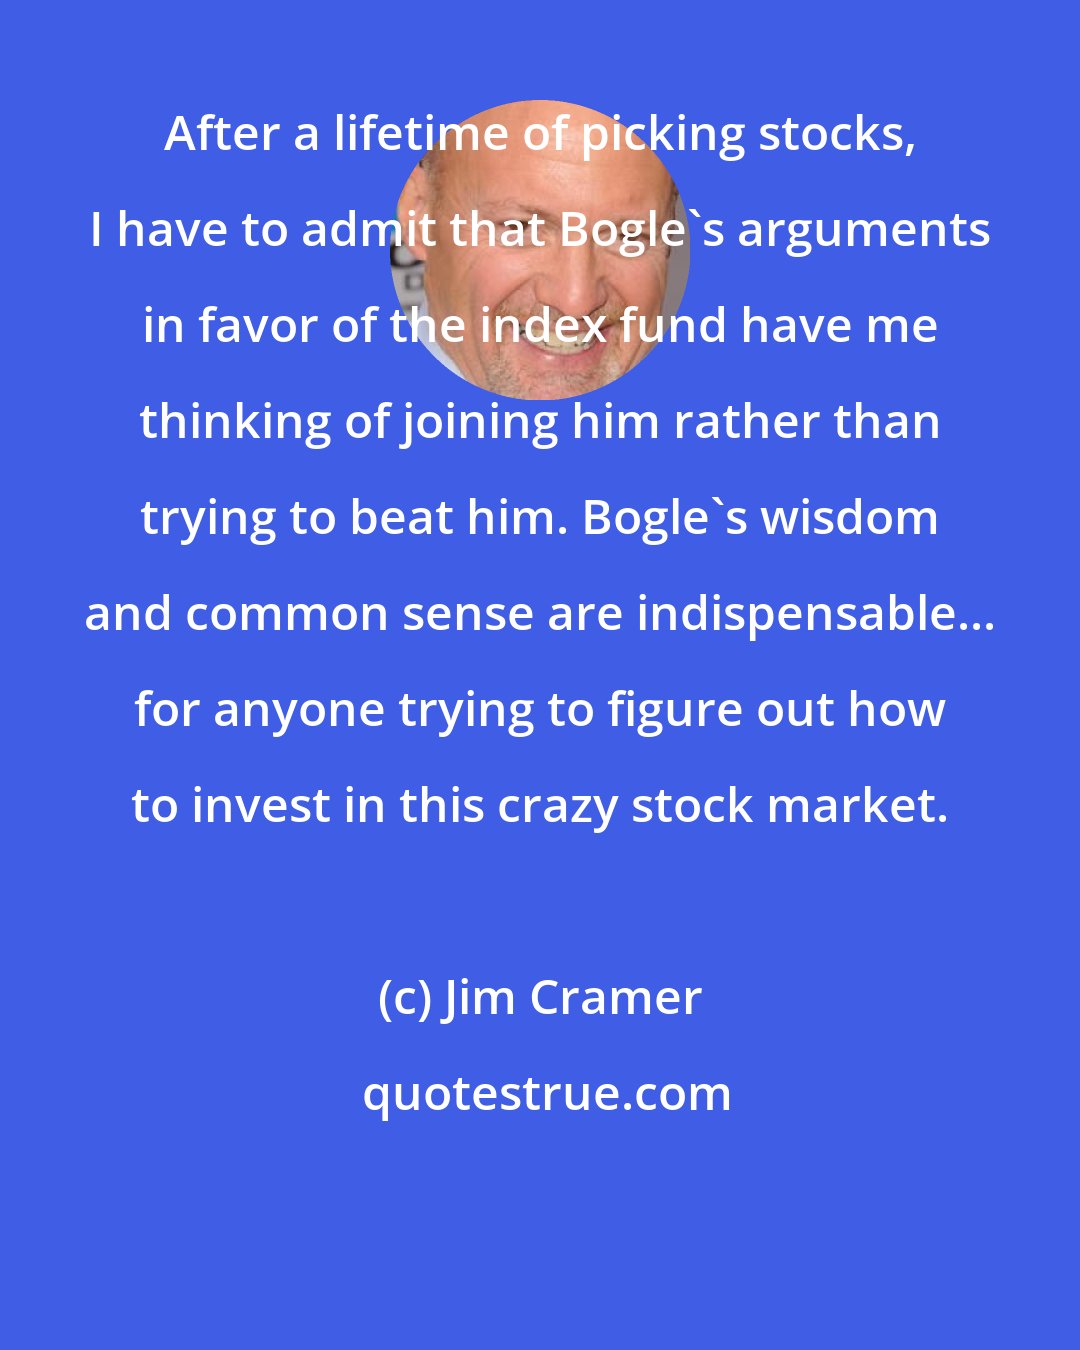 Jim Cramer: After a lifetime of picking stocks, I have to admit that Bogle's arguments in favor of the index fund have me thinking of joining him rather than trying to beat him. Bogle's wisdom and common sense are indispensable... for anyone trying to figure out how to invest in this crazy stock market.